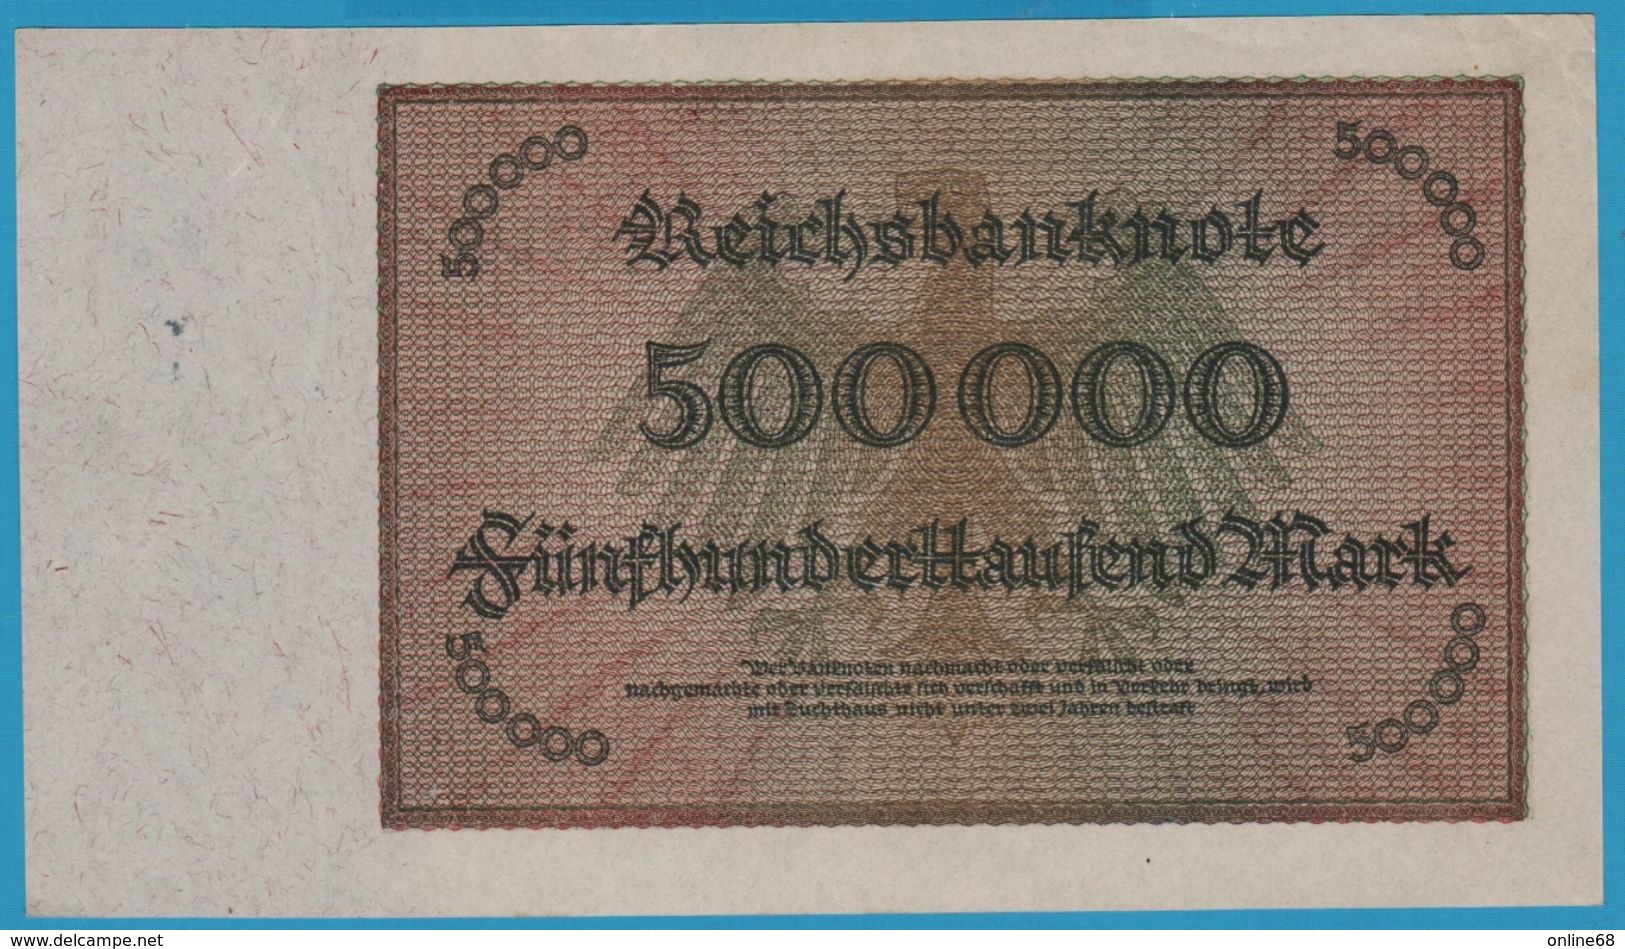 DEUTSCHES REICH 500.000 Mark 01.05.1923 SERIE 35AB.032650 P# 88b Two Serial # On Front Only - 500000 Mark